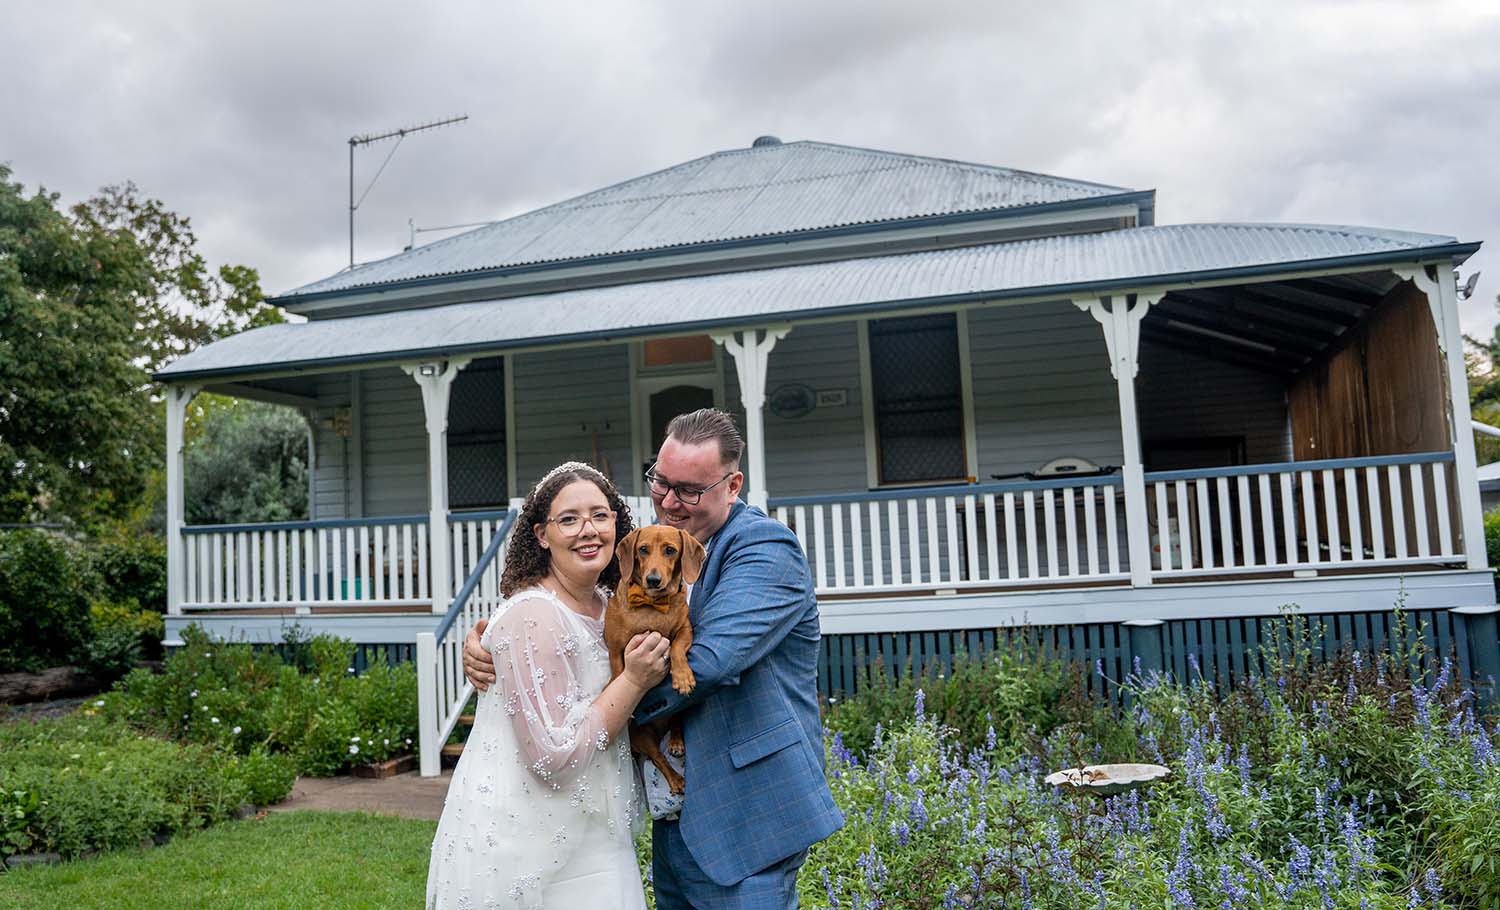 Wedding Photography - Bride and Groom in front of house